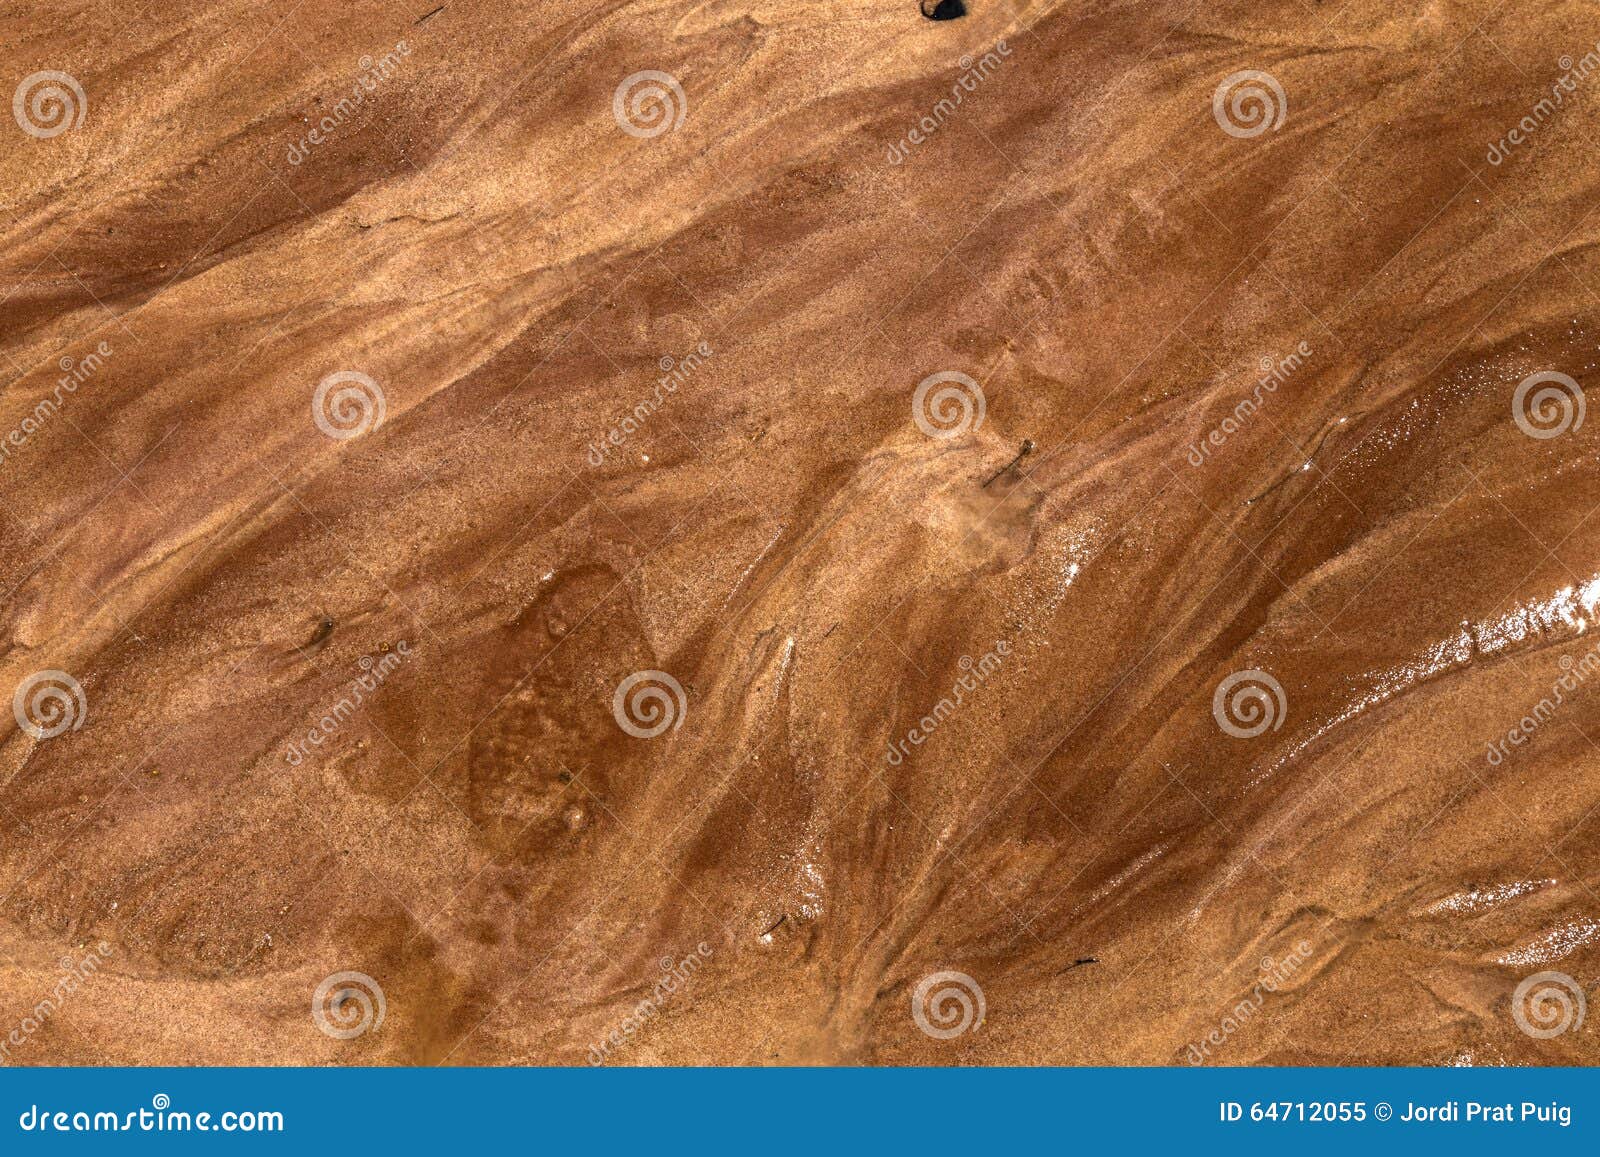 red sand texture background